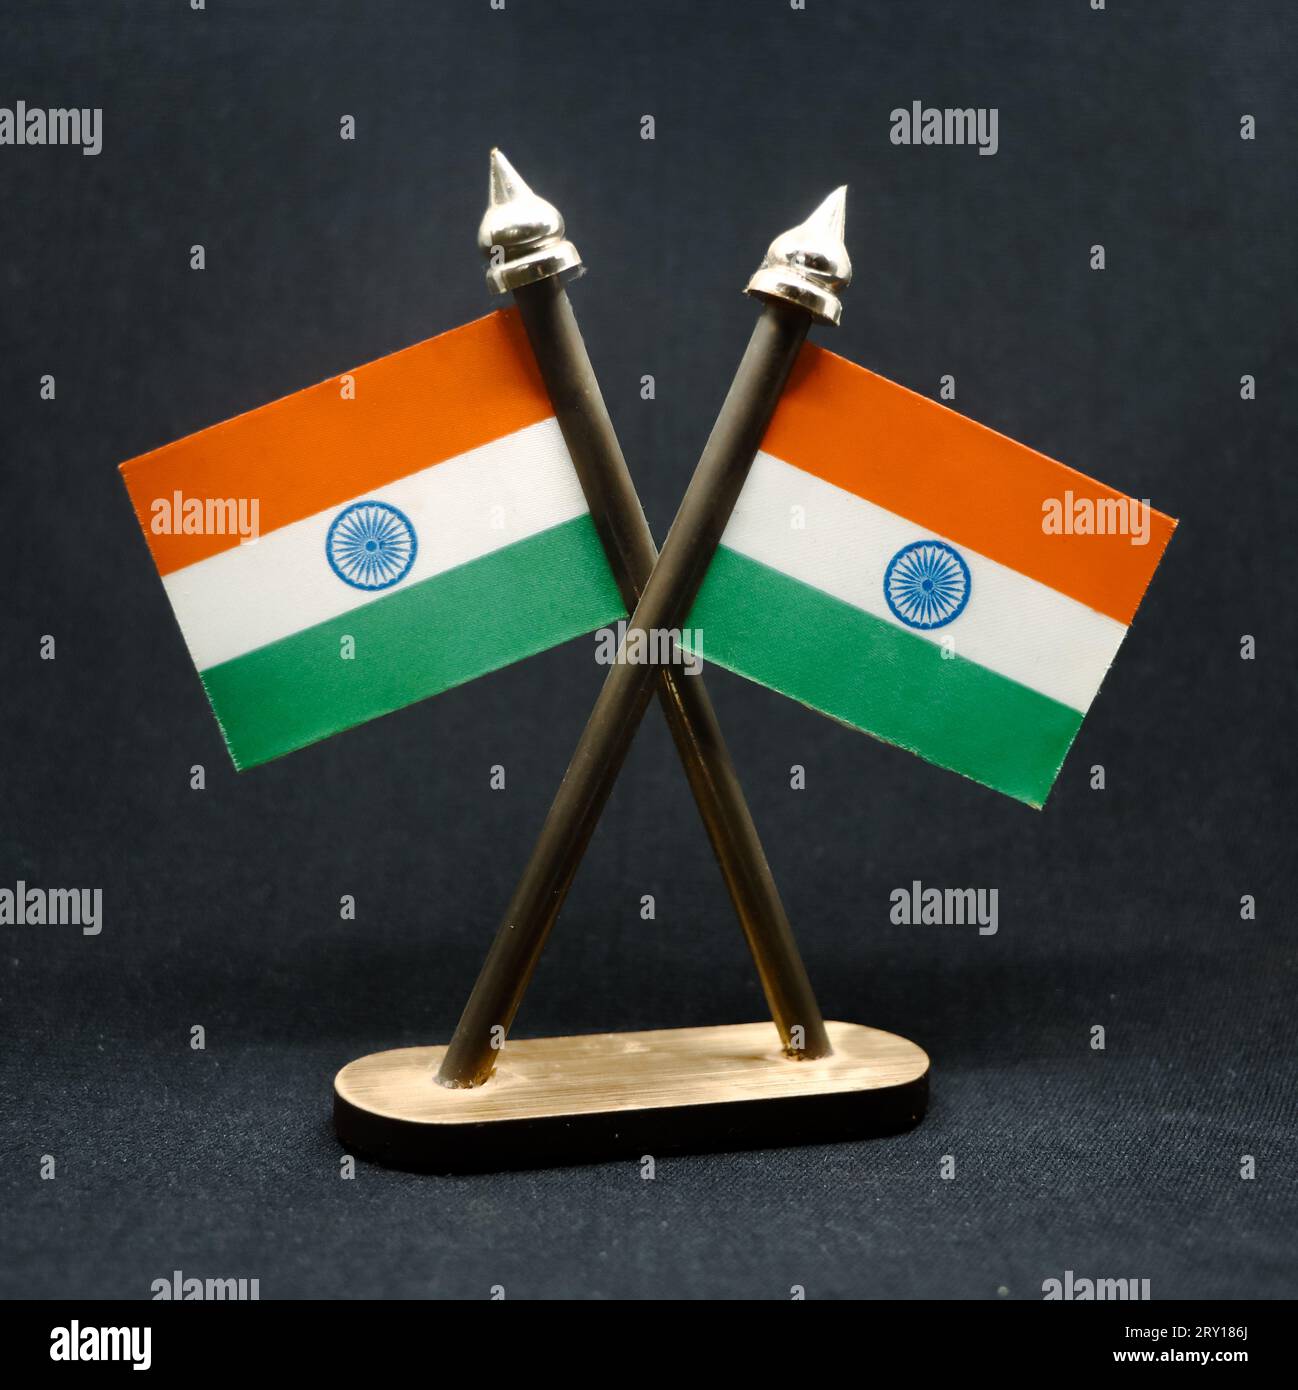 The national flag of India in republic tricolors with the ashoka chakra fixed on two poles isolated in a black background Stock Photo